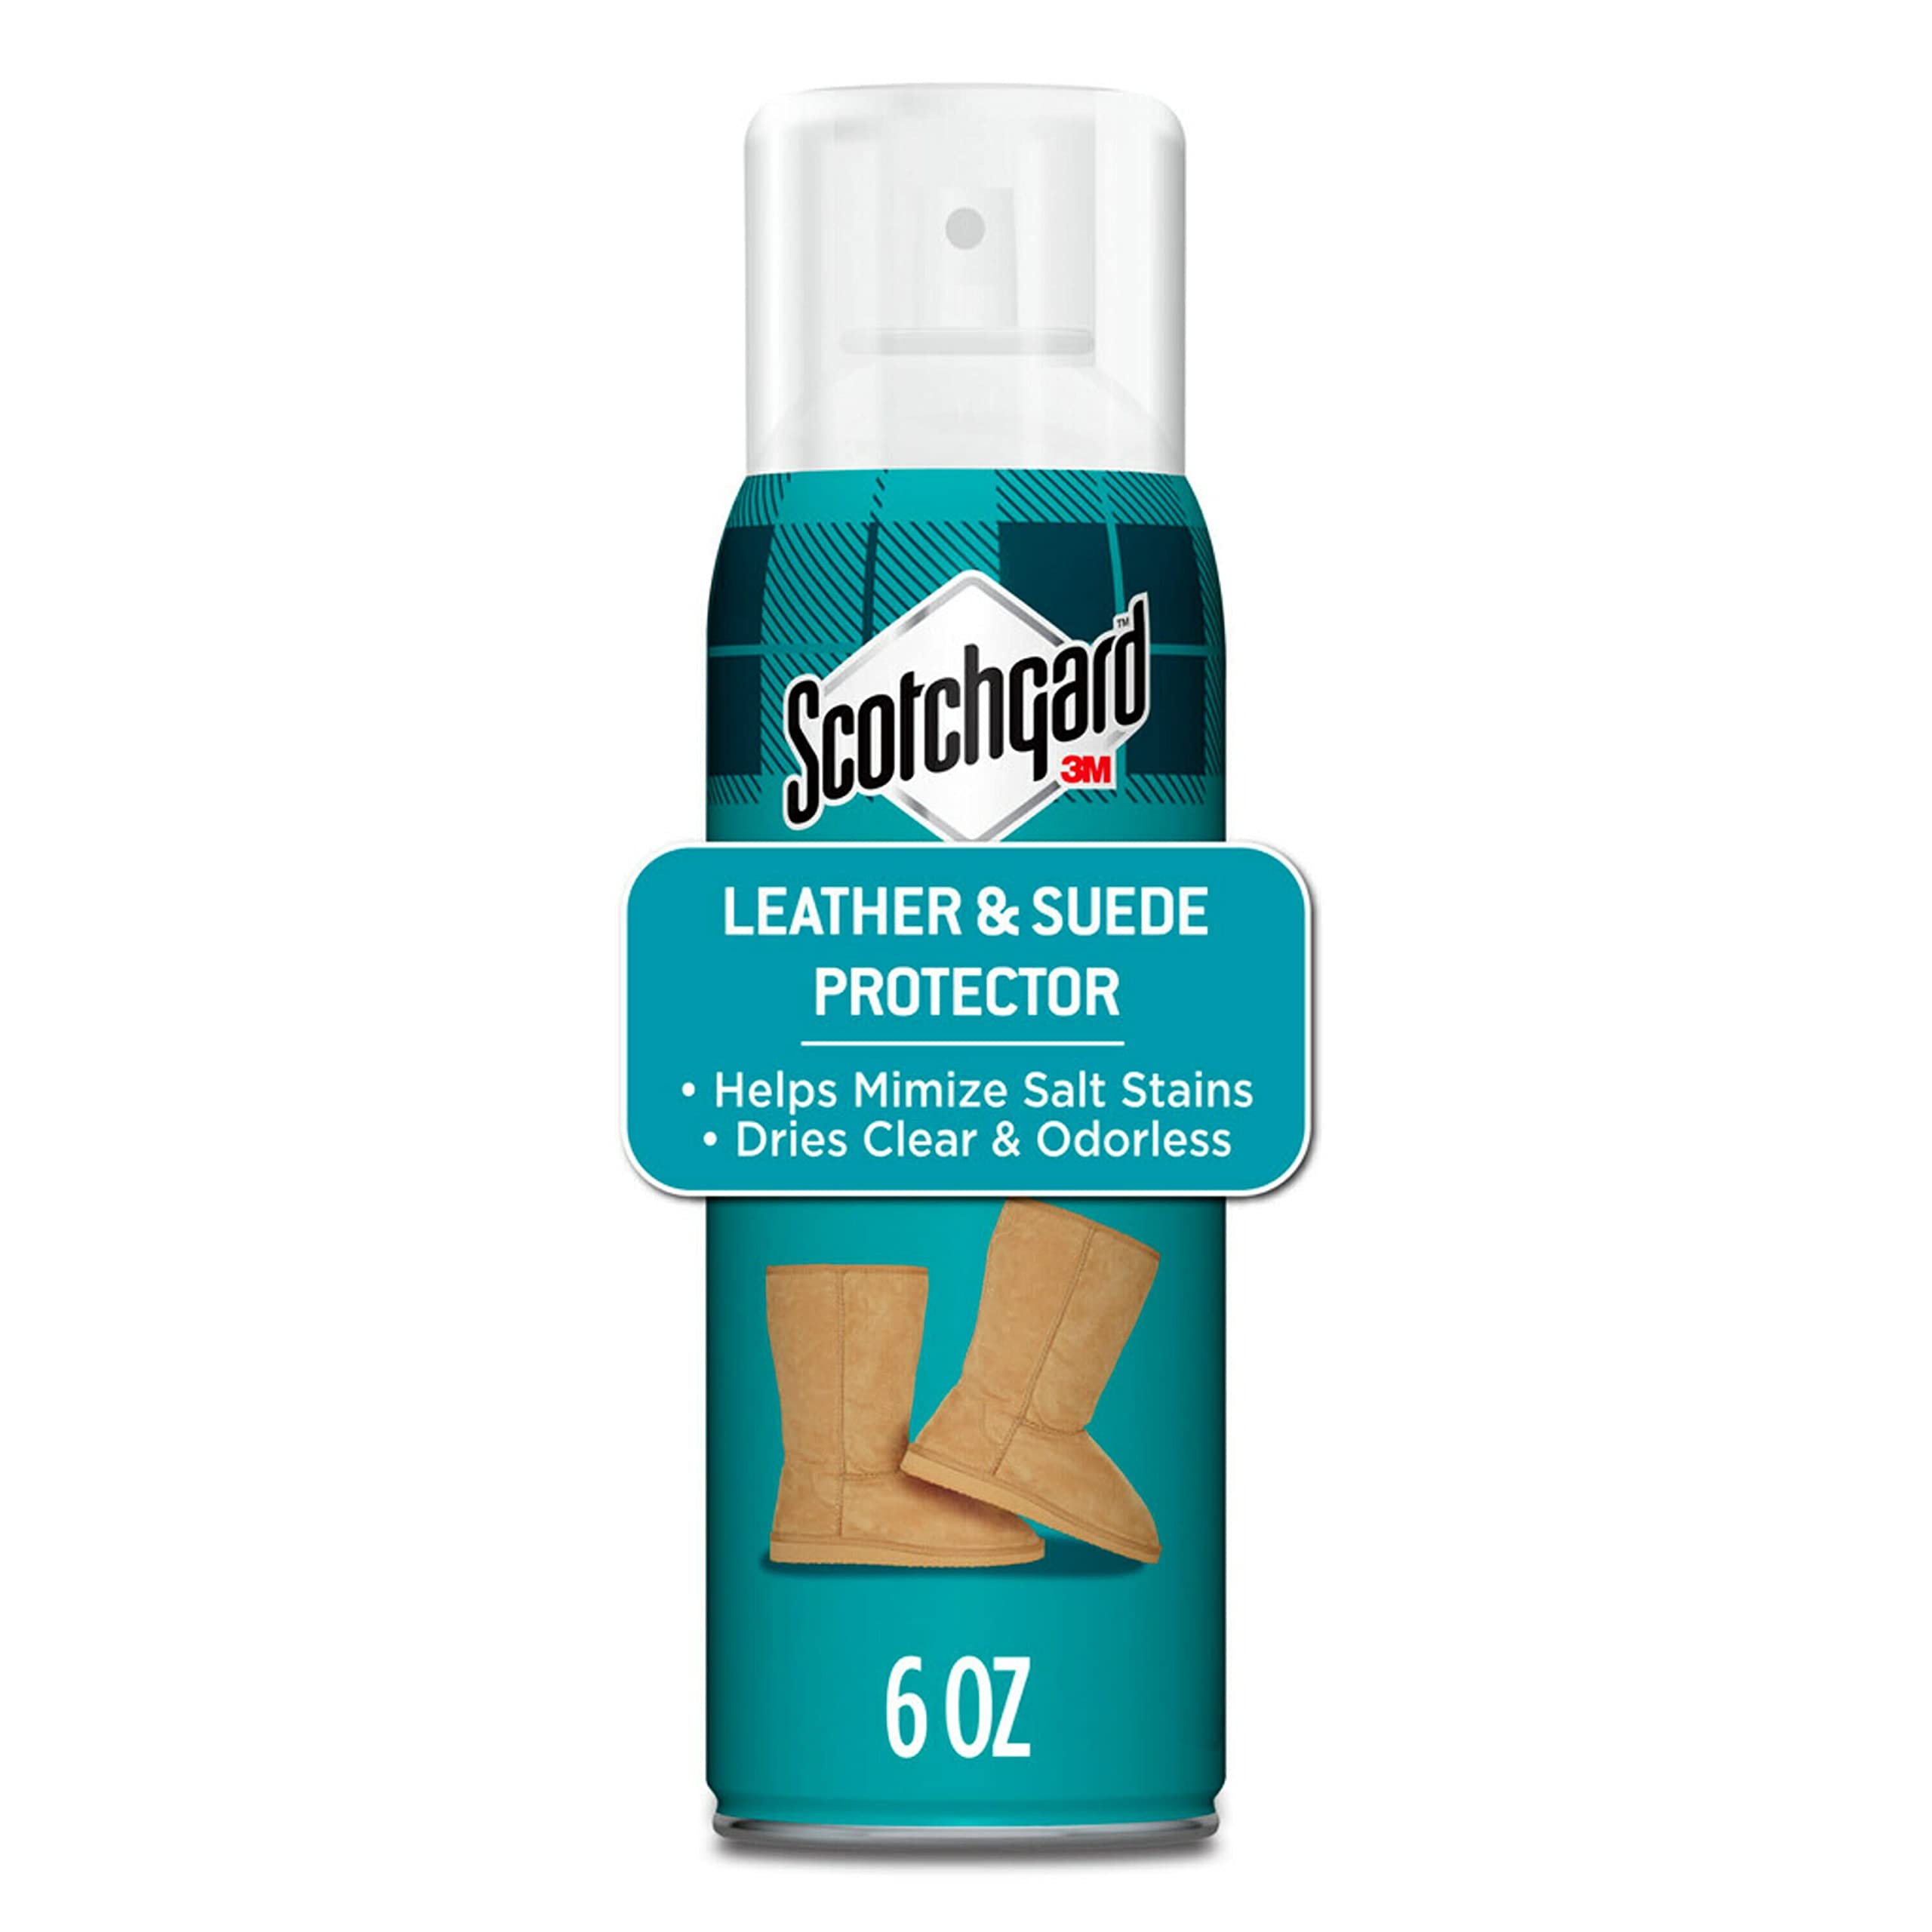 Scotchgard Suede & Nubuck Protector, Helps Repel Water, Designed to Block Out Rain, Sleet and Snow, Ideal for Use on Footwear, Coats, Backpacks, Accessories, 6 Ounces